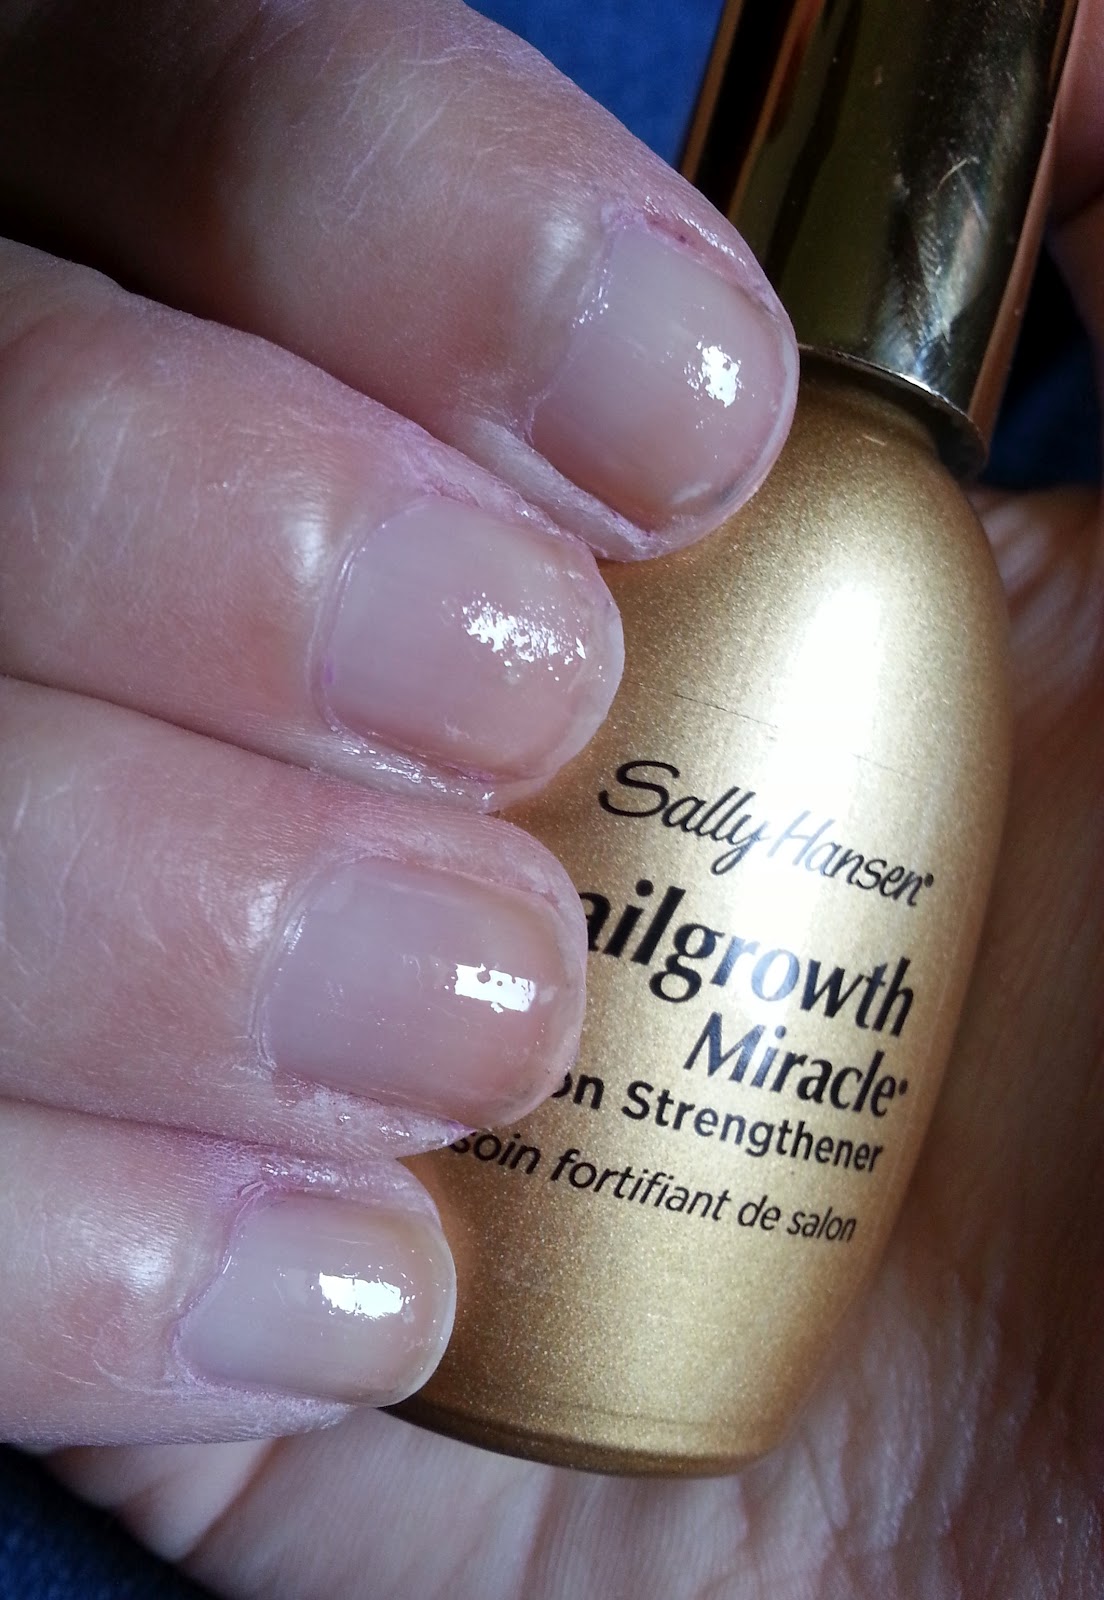 Sally Hansen Nial Growth Miracle,. These are the finished nails - Week 1